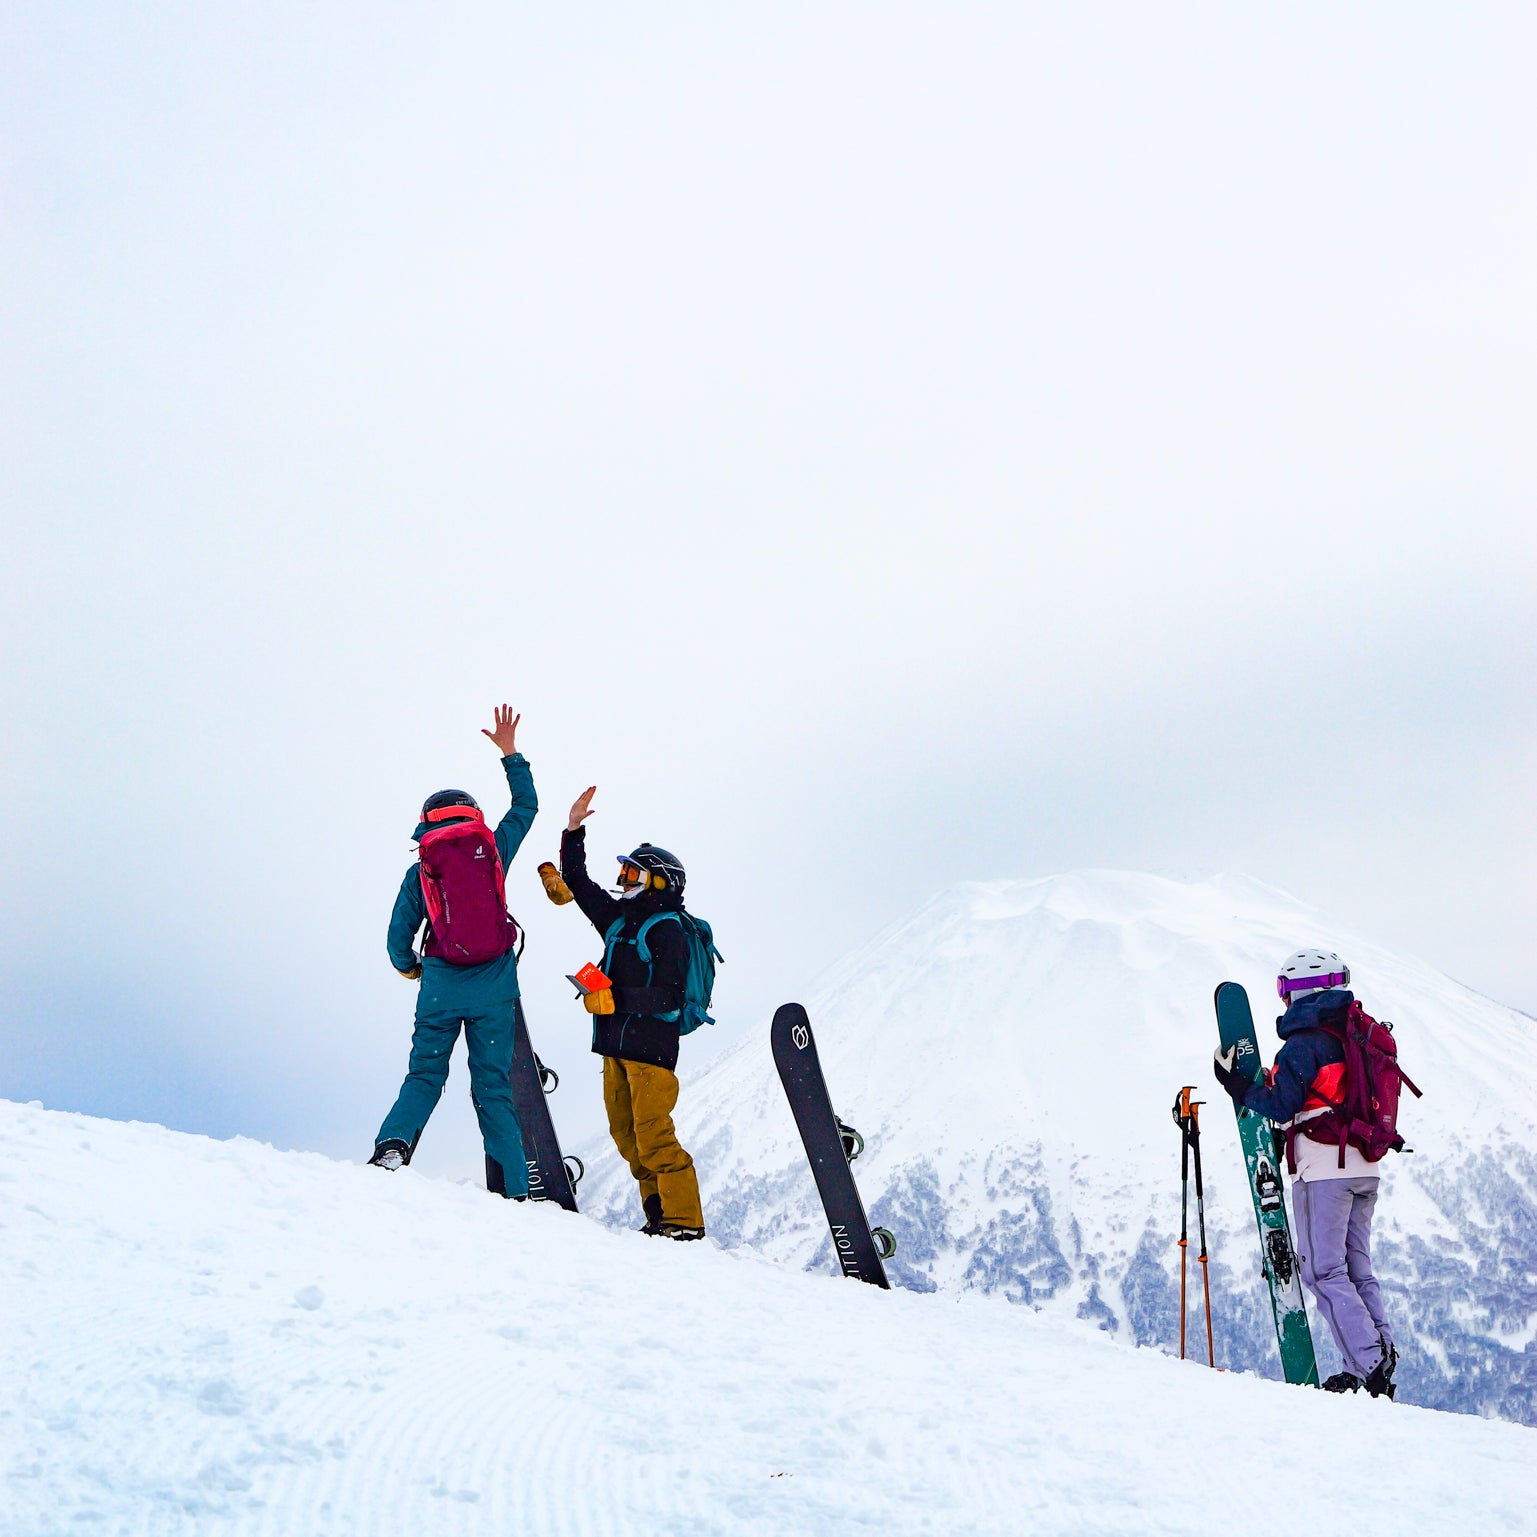 It's Not How We Ski, It's Why: Our Core Values